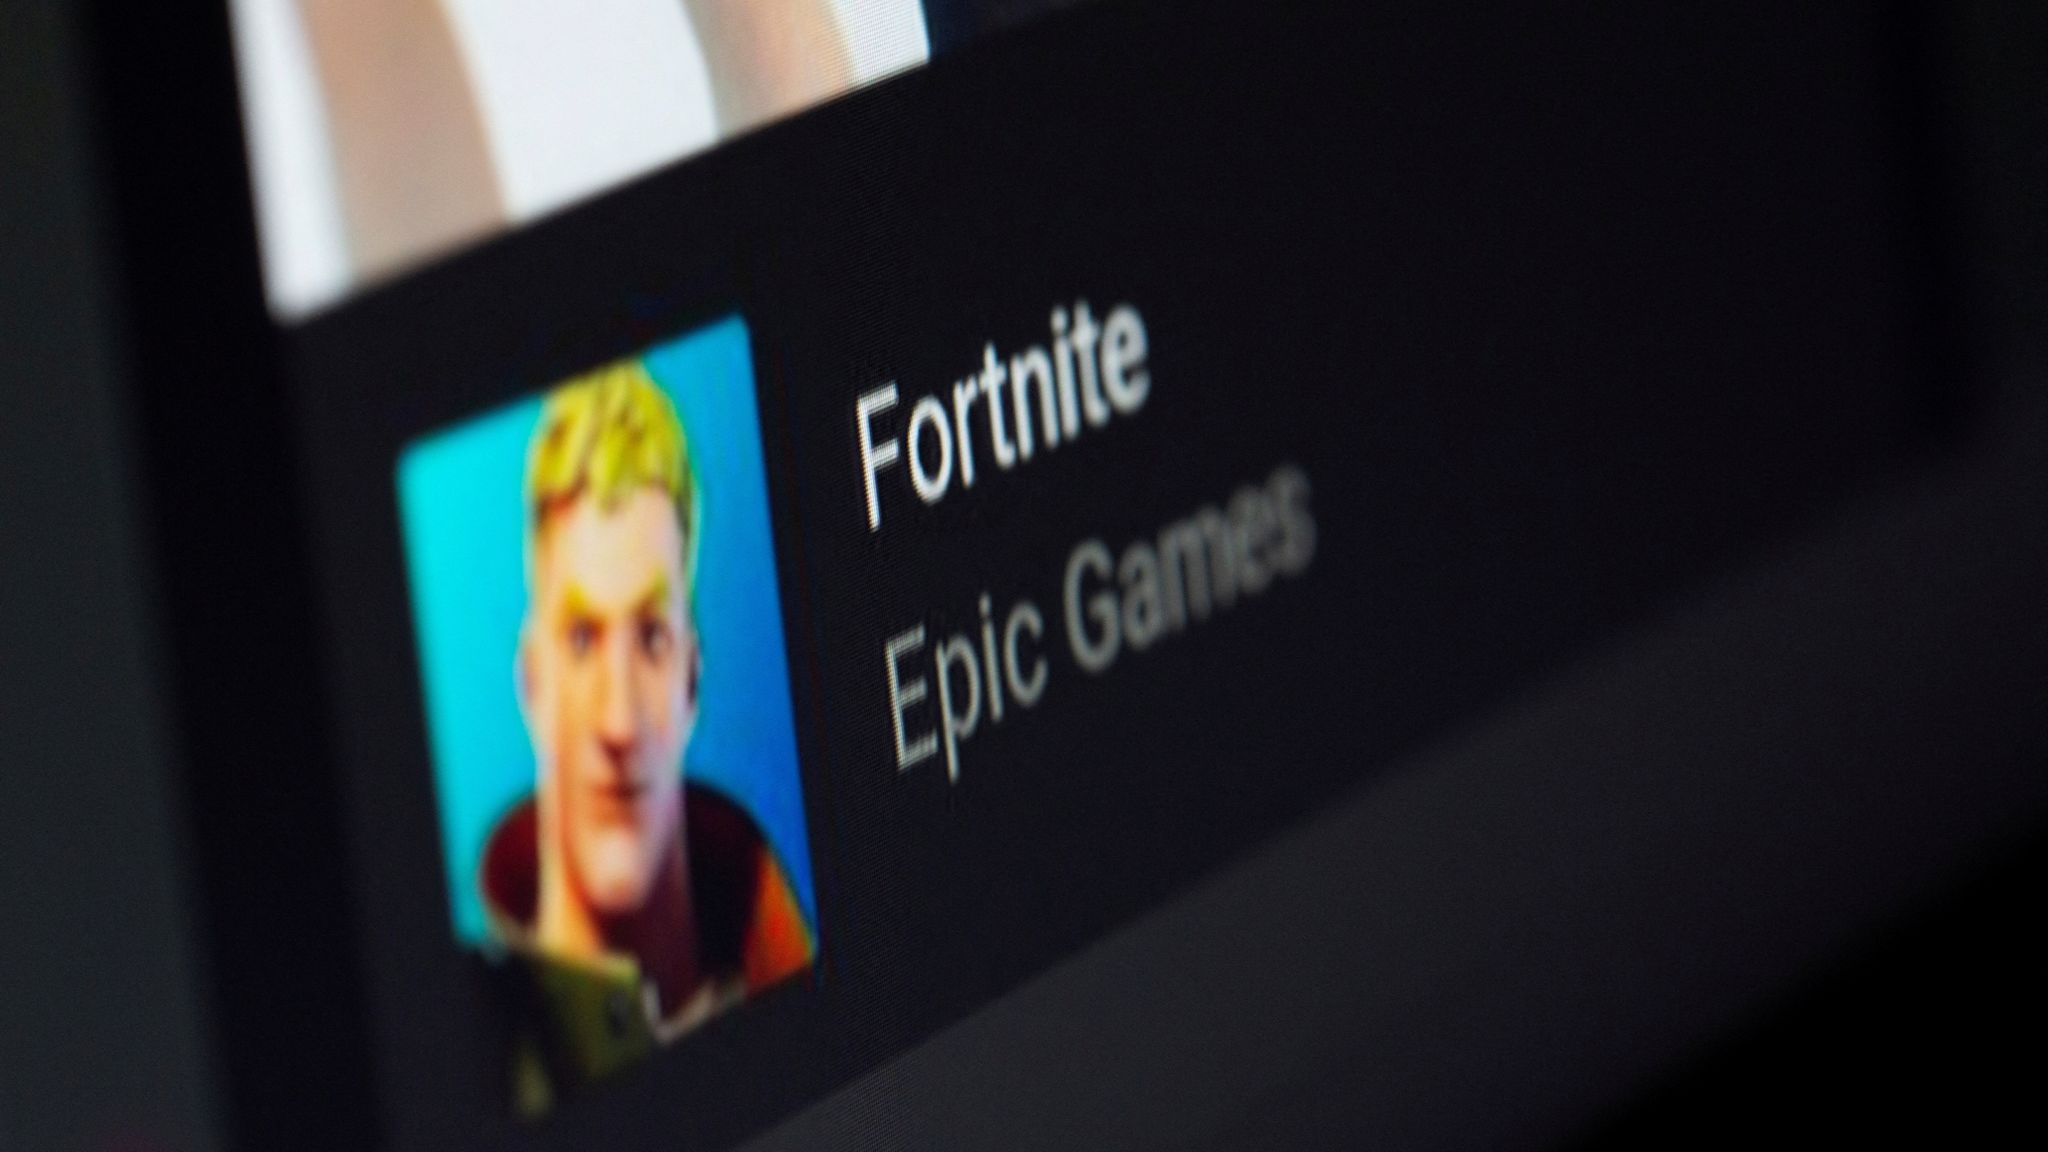 Apple wants to take the Epic Games case to the Supreme Court